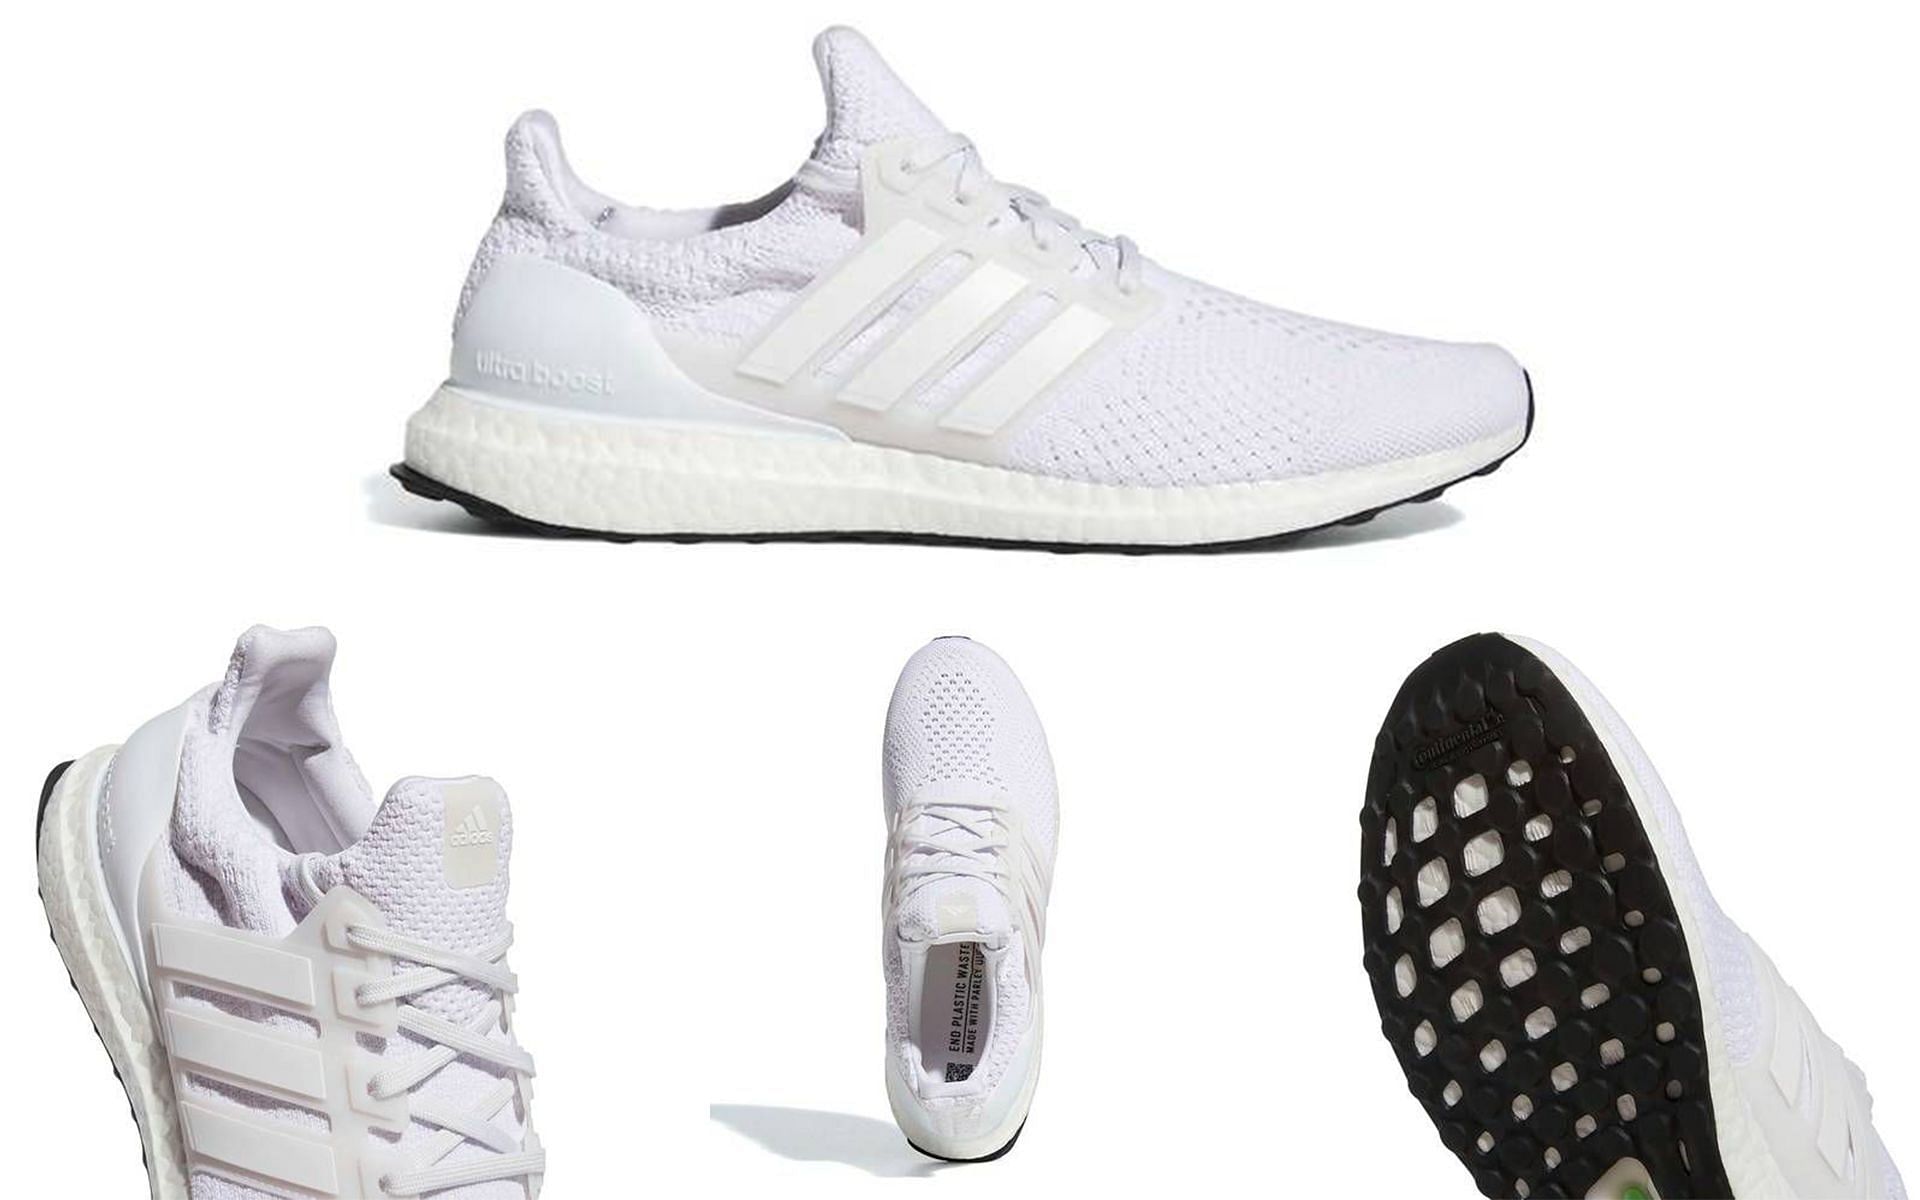 A closer at the upcoming Adidas UltraBOOST DNA 5.0 Cloud White shoes (Image via Sportskeeda)